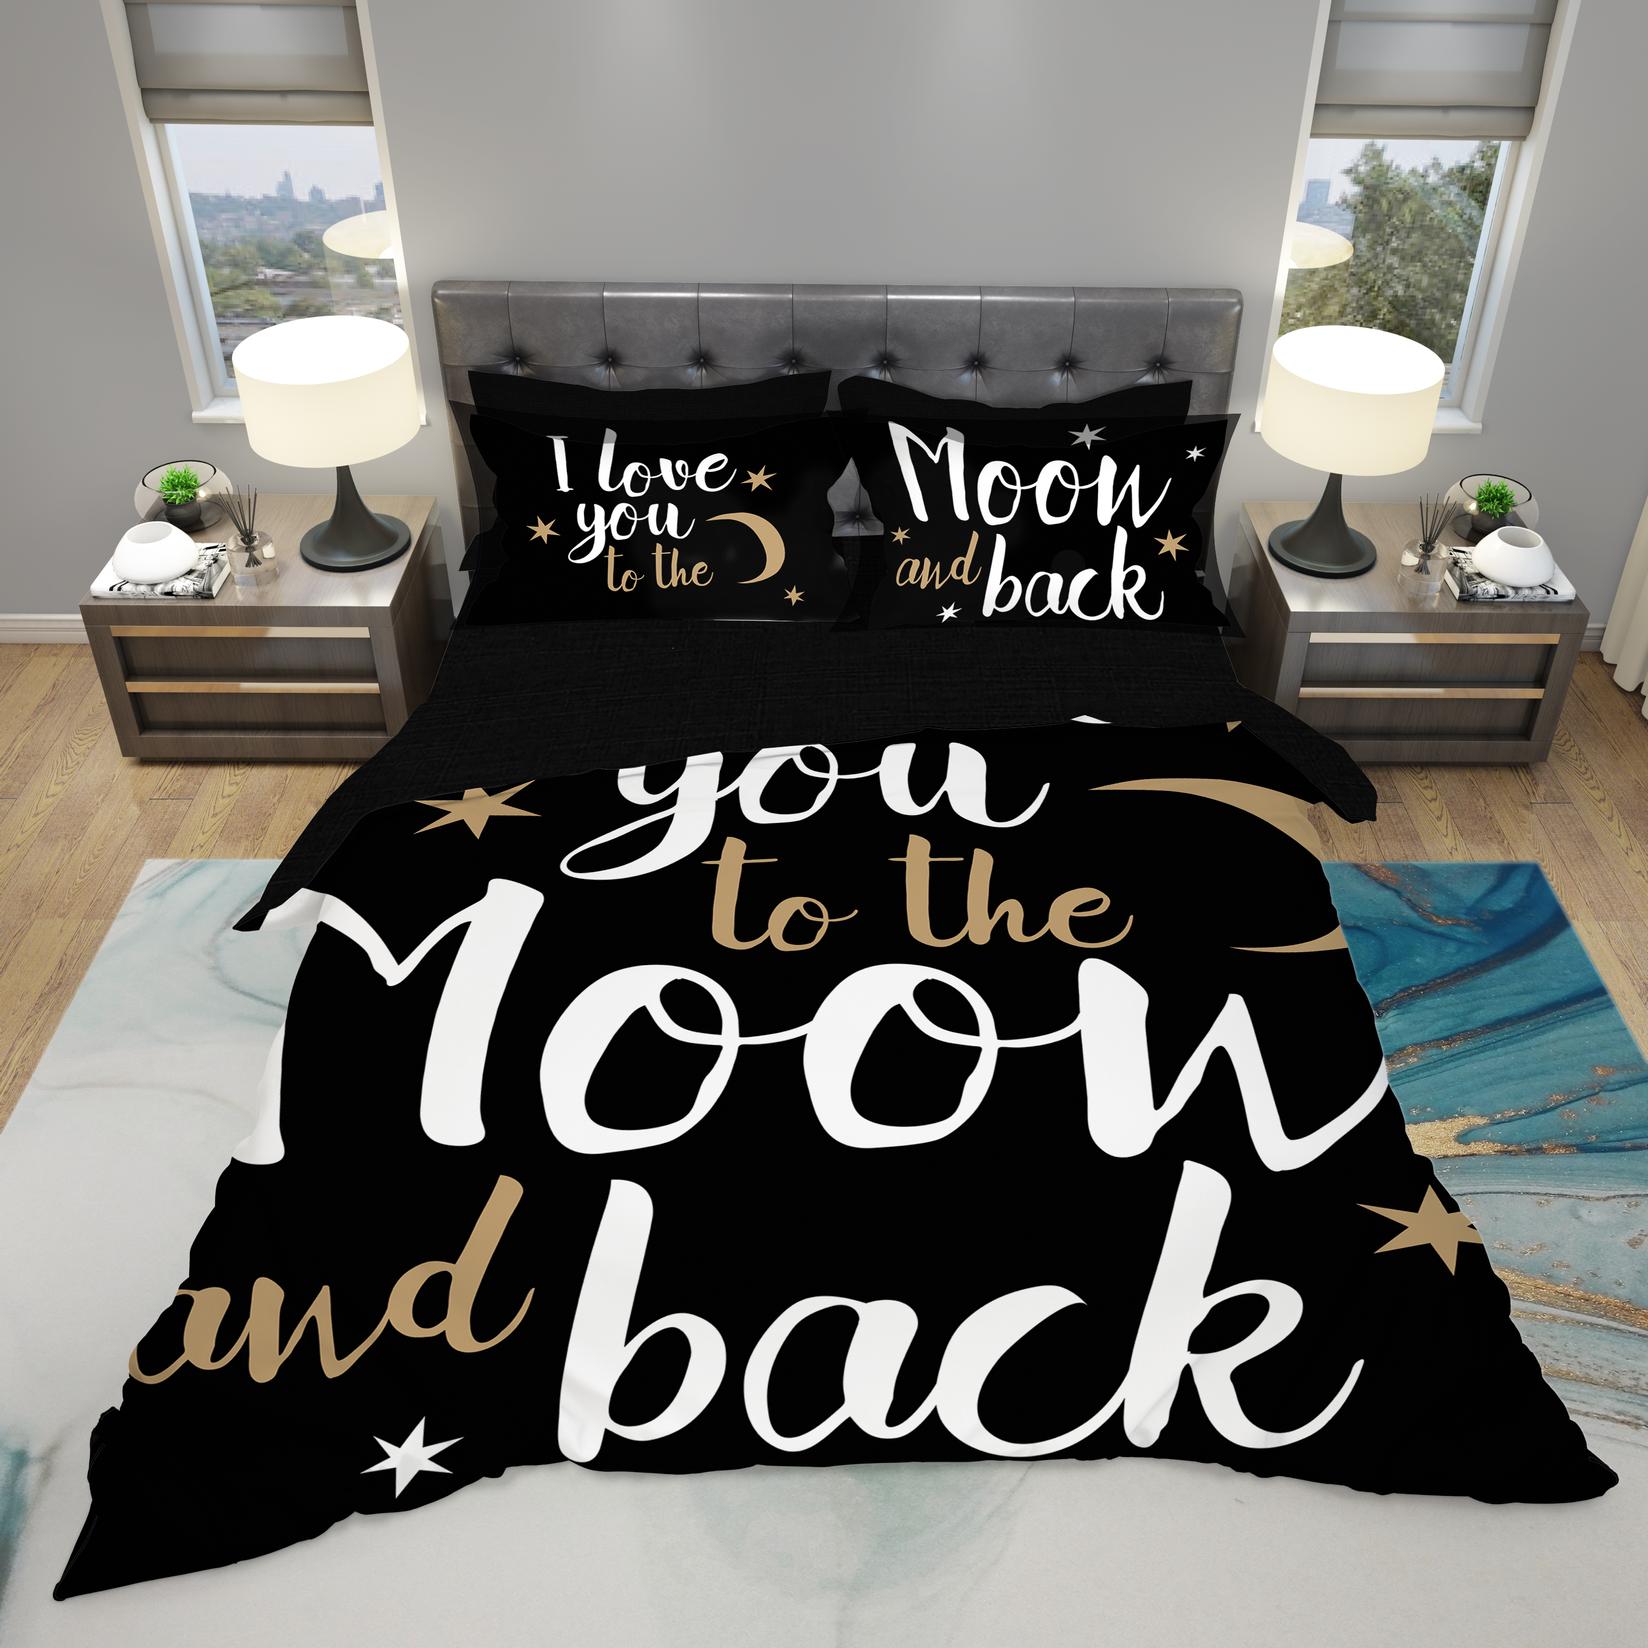 Selected image for MEY HOME Posteljina I love you to the moon and back 3D 200x220cm crno-bela